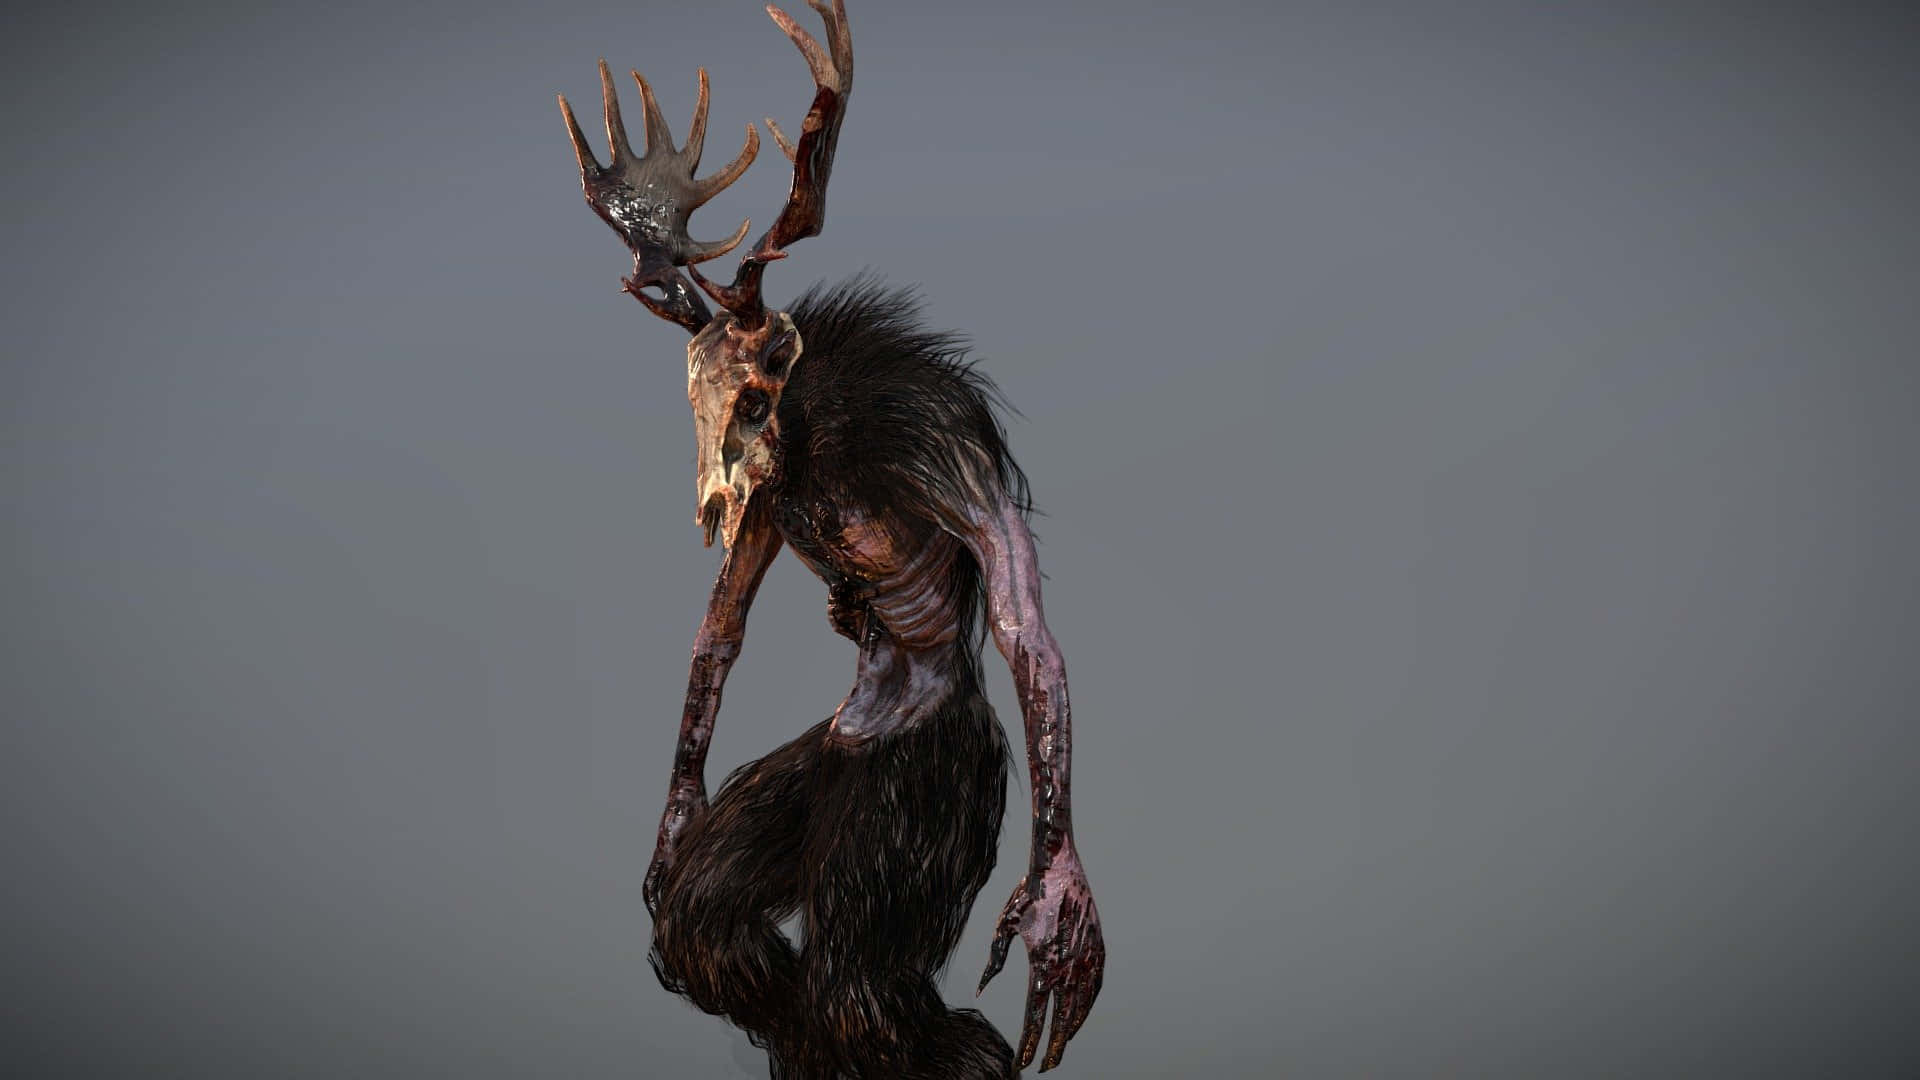 The majestic Wendigo, feared and respected by locals